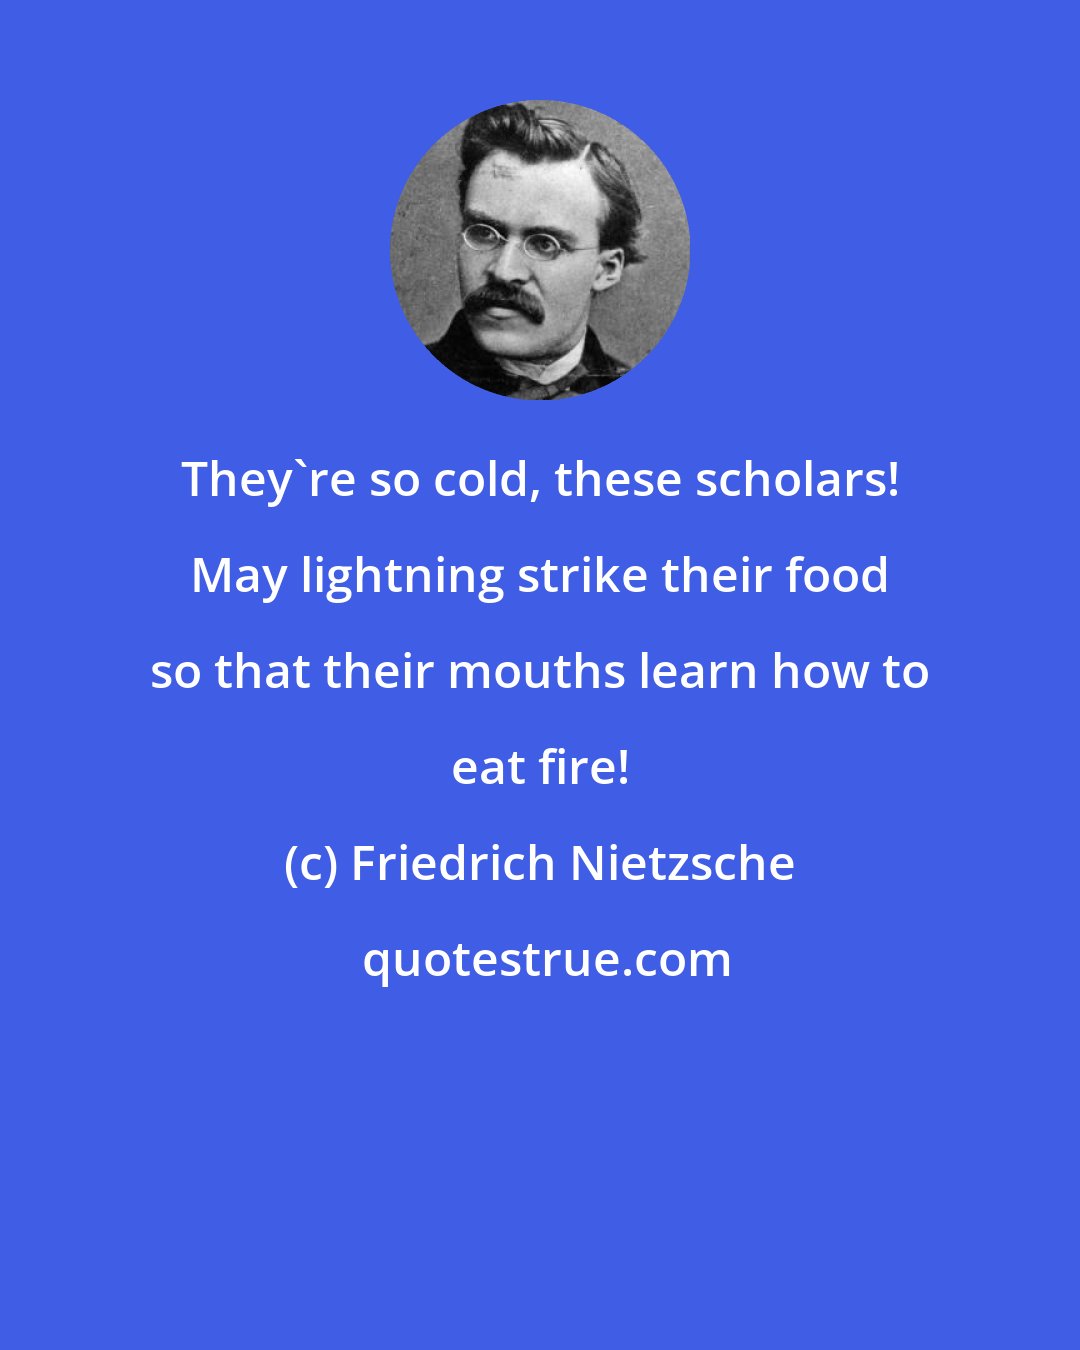 Friedrich Nietzsche: They're so cold, these scholars! May lightning strike their food so that their mouths learn how to eat fire!